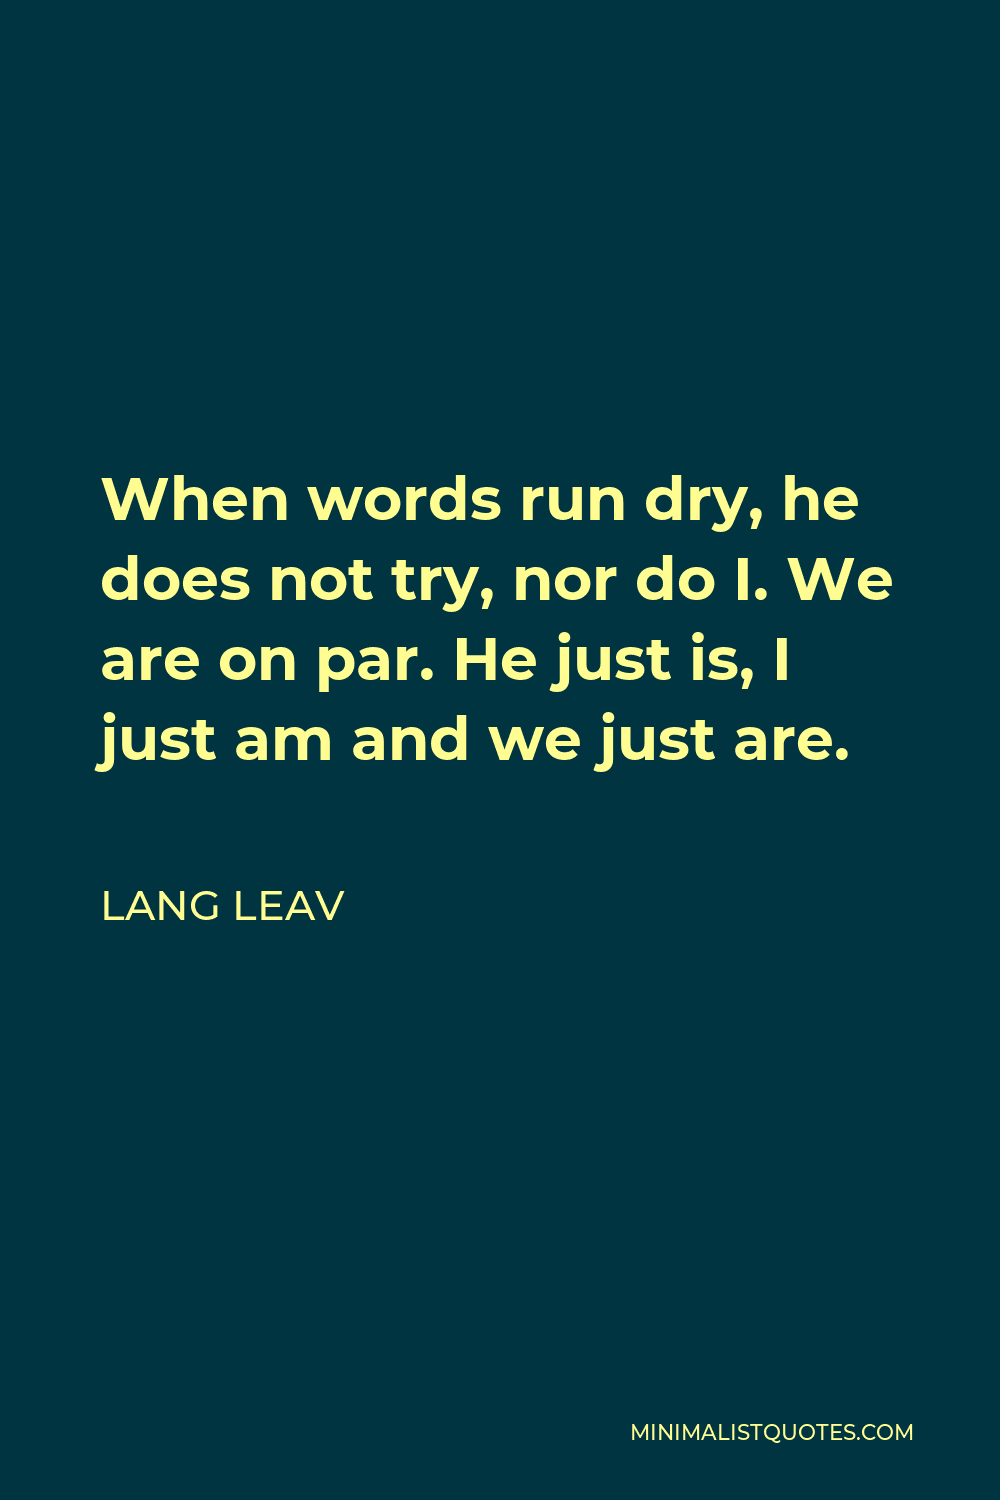 Lang Leav Quote - When words run dry, he does not try, nor do I. We are on par. He just is, I just am and we just are.